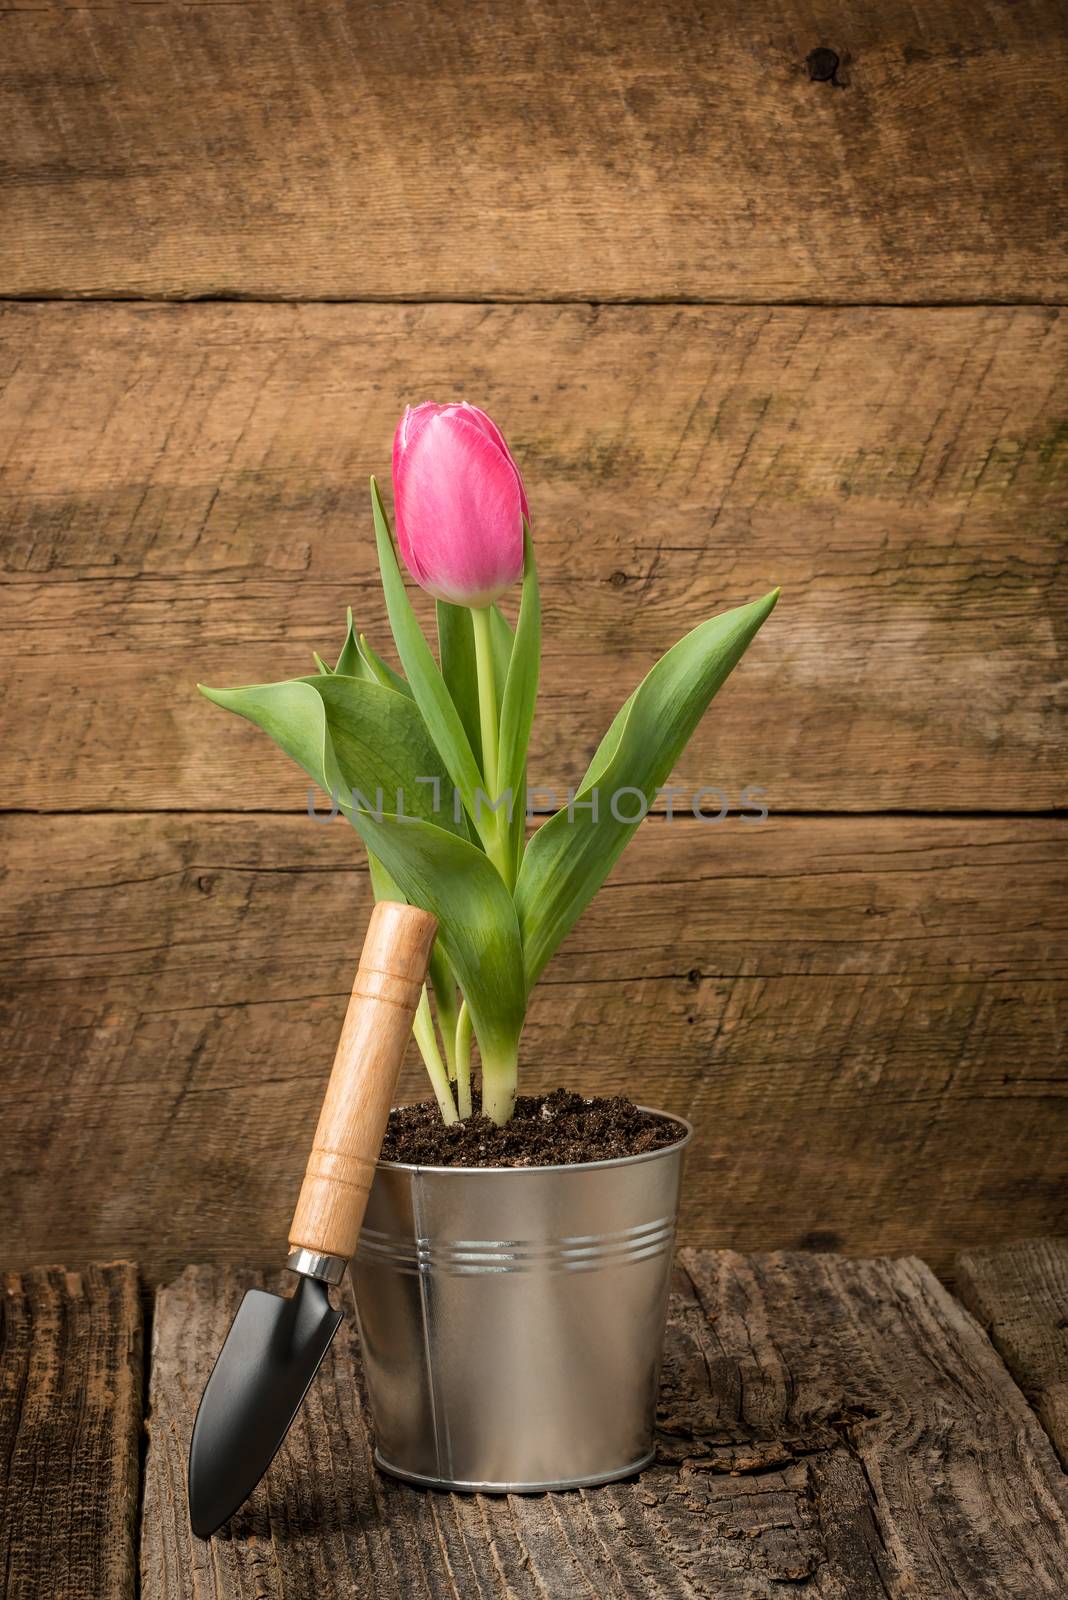 Rustic Tulip by billberryphotography